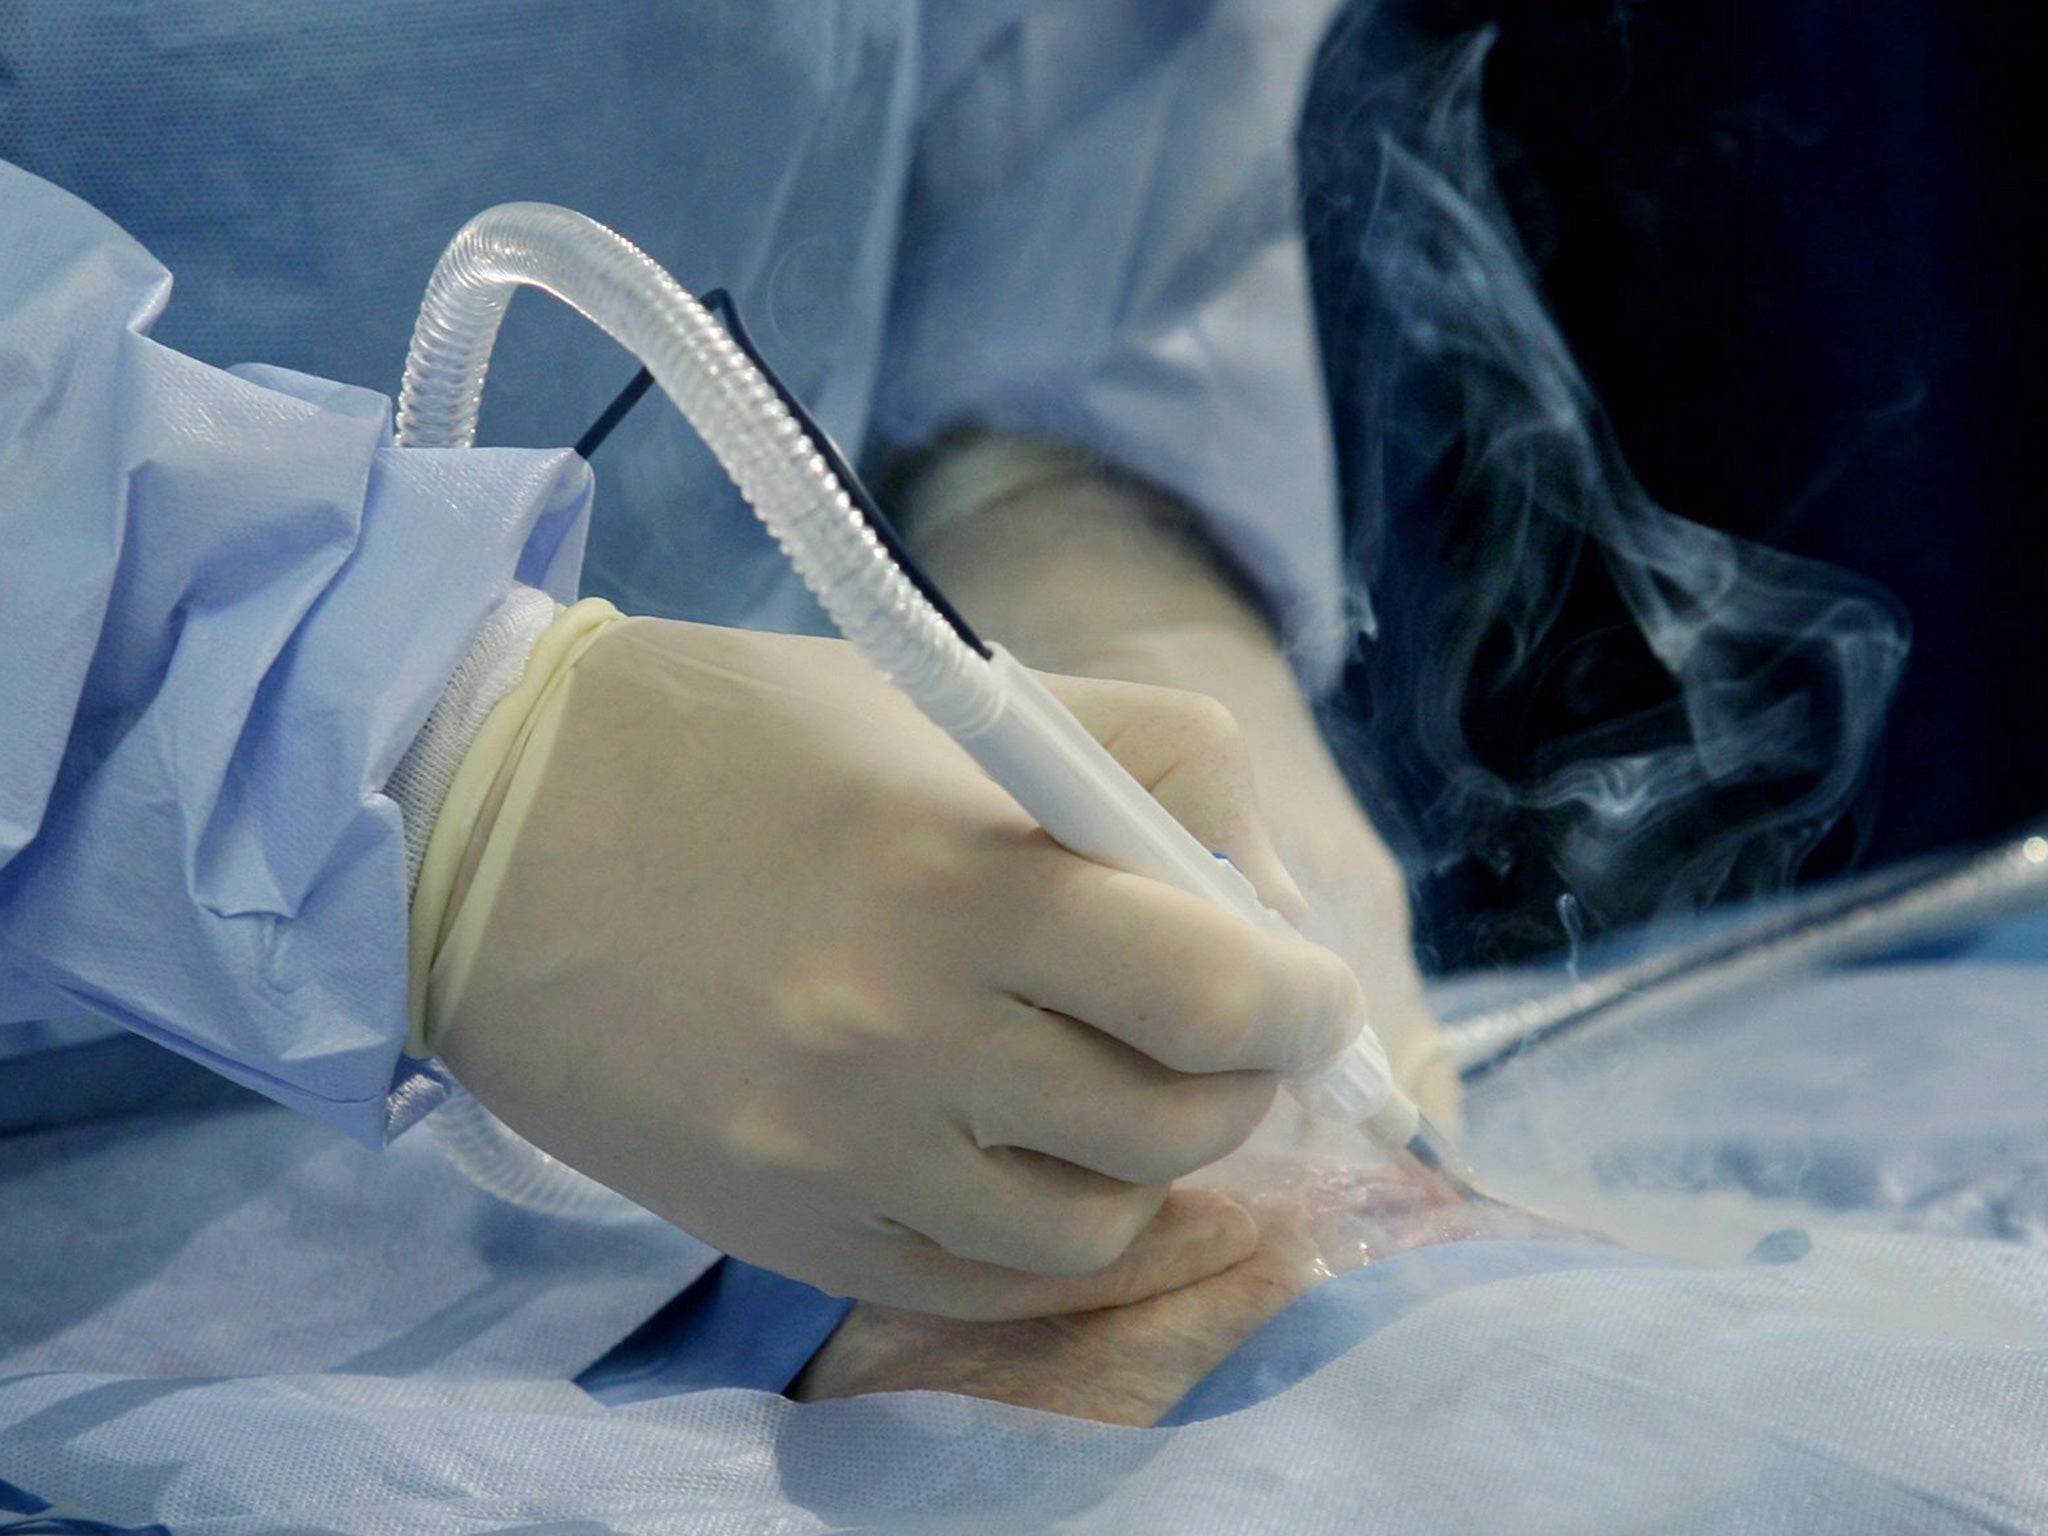 Lasers and cauterizing tools used during surgery